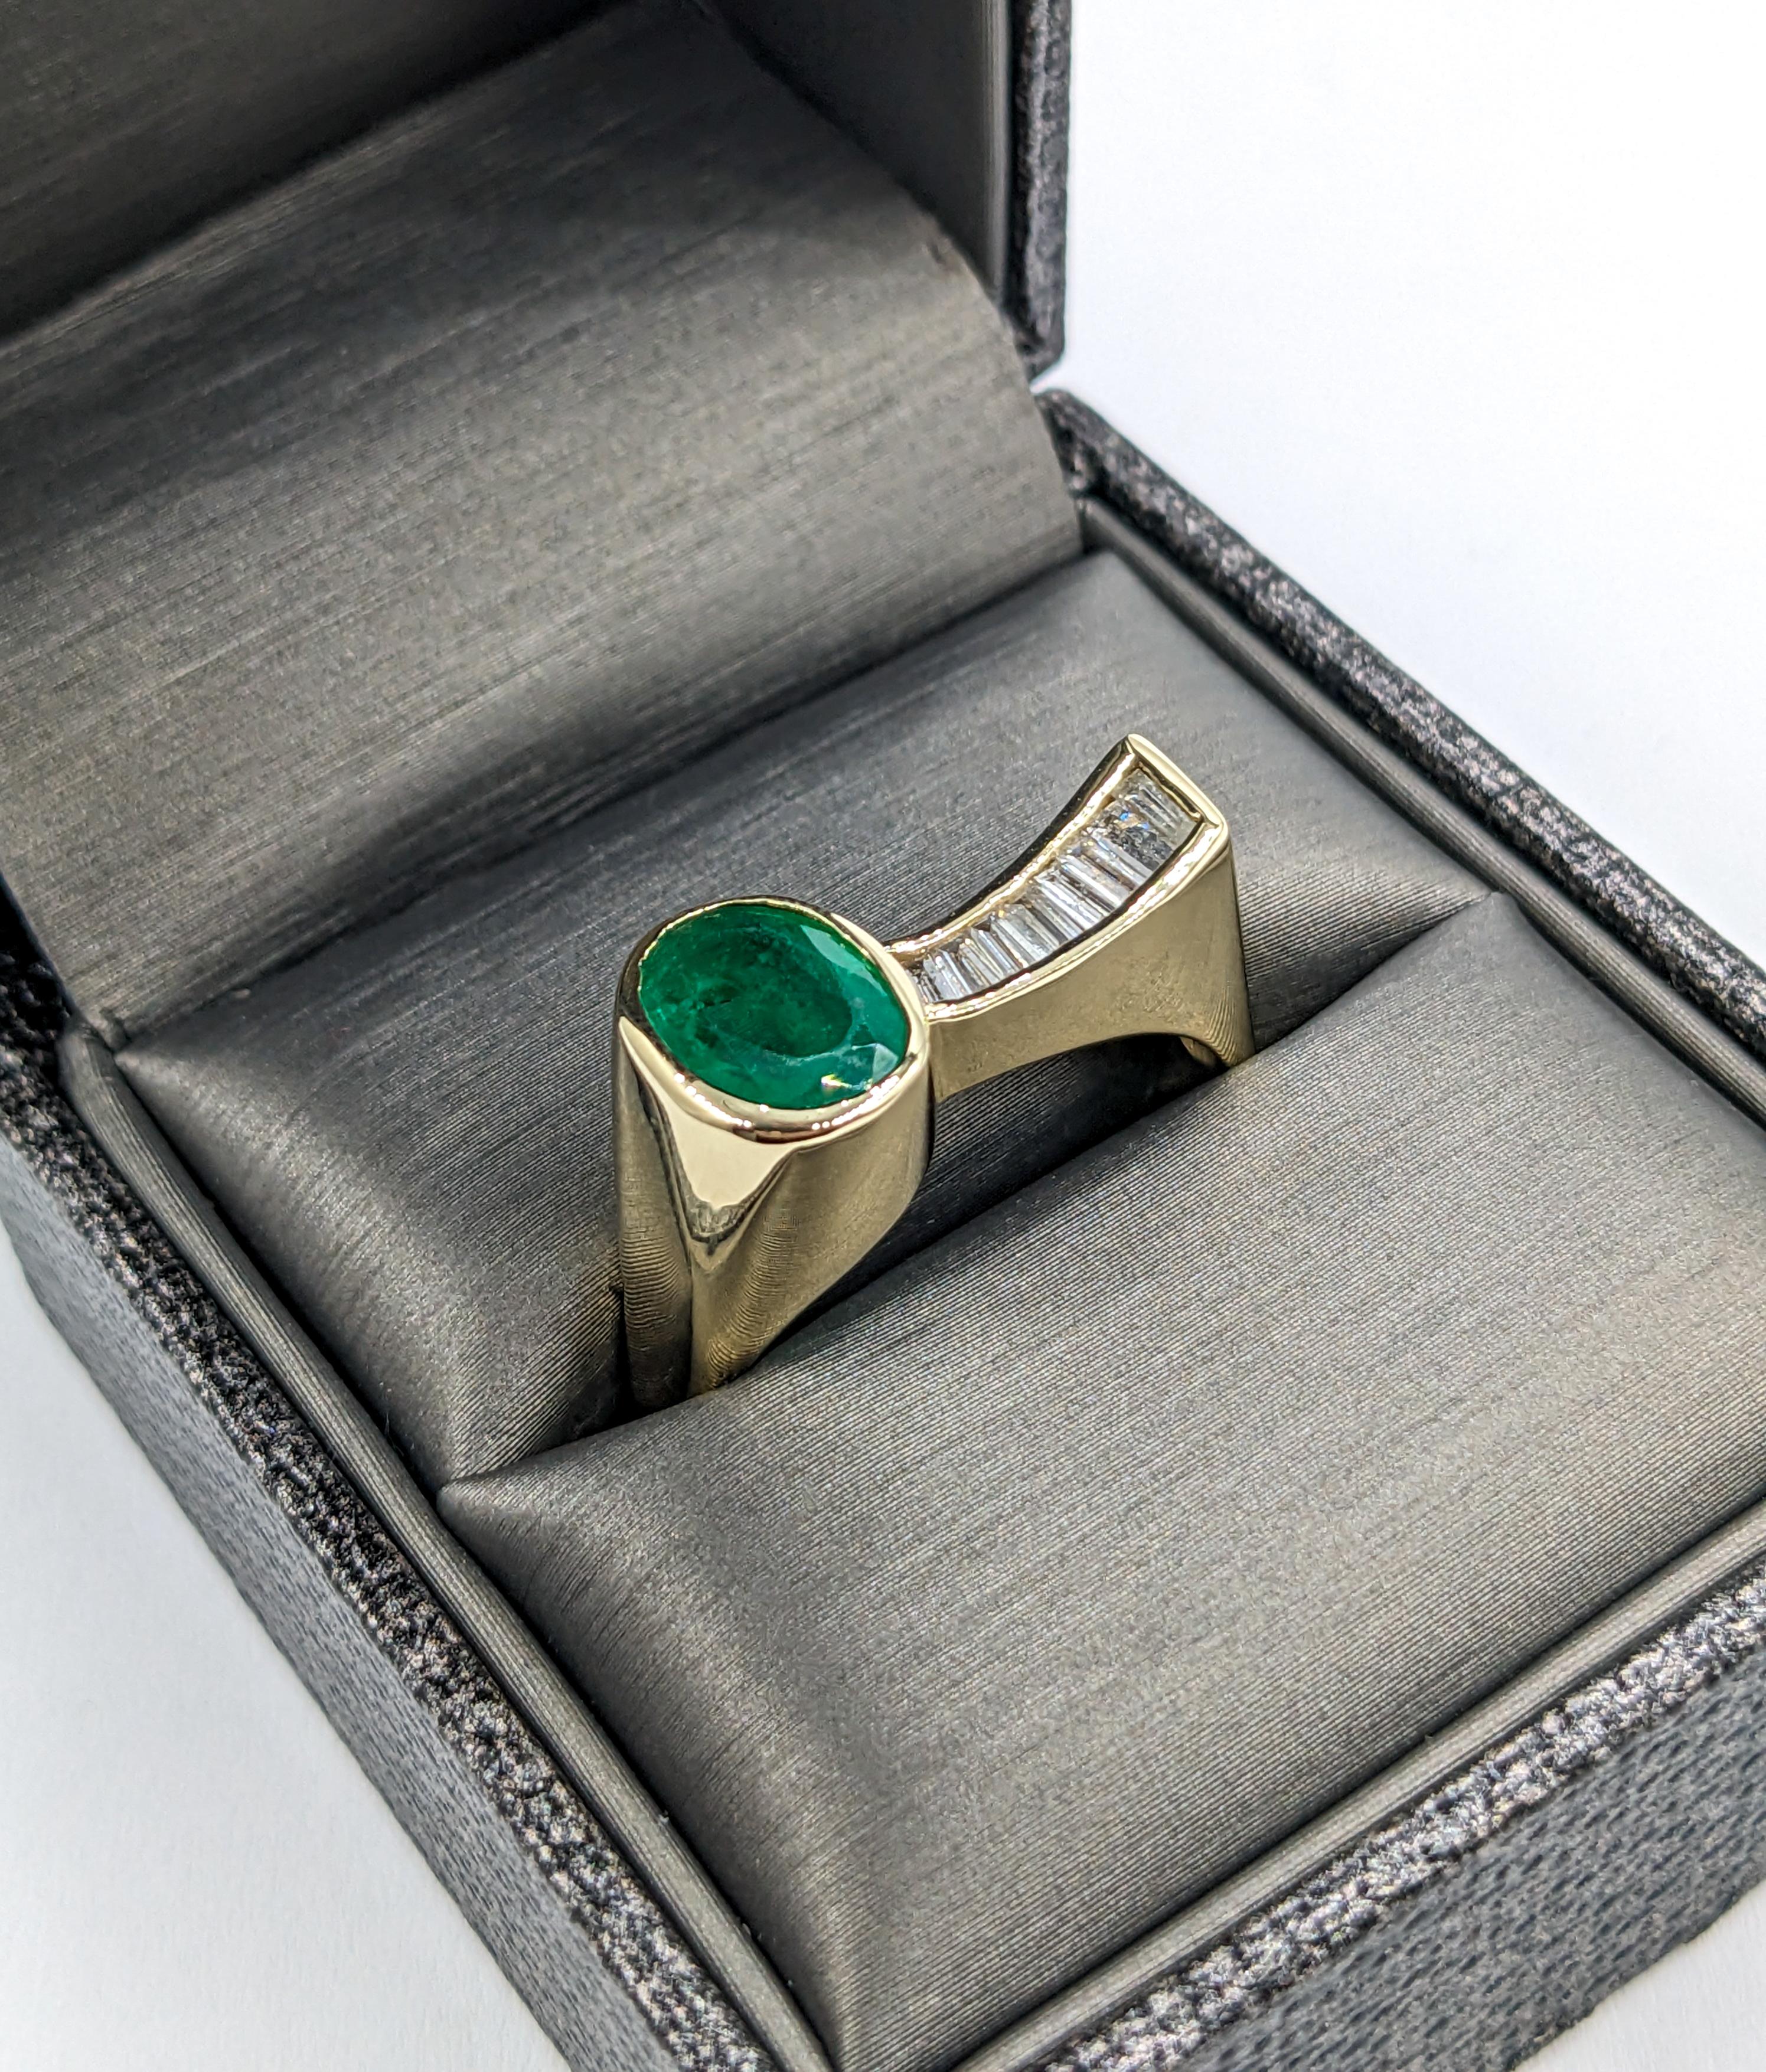 Unique Vintage 2.0ct Emerald & Baguette Diamond Statement Ring in 14K Gold

Elevate your style with this stunning emerald ring, meticulously crafted in lustrous 14 karat yellow gold. This ring boasts a magnificent 2.0 carat emerald centerpiece,